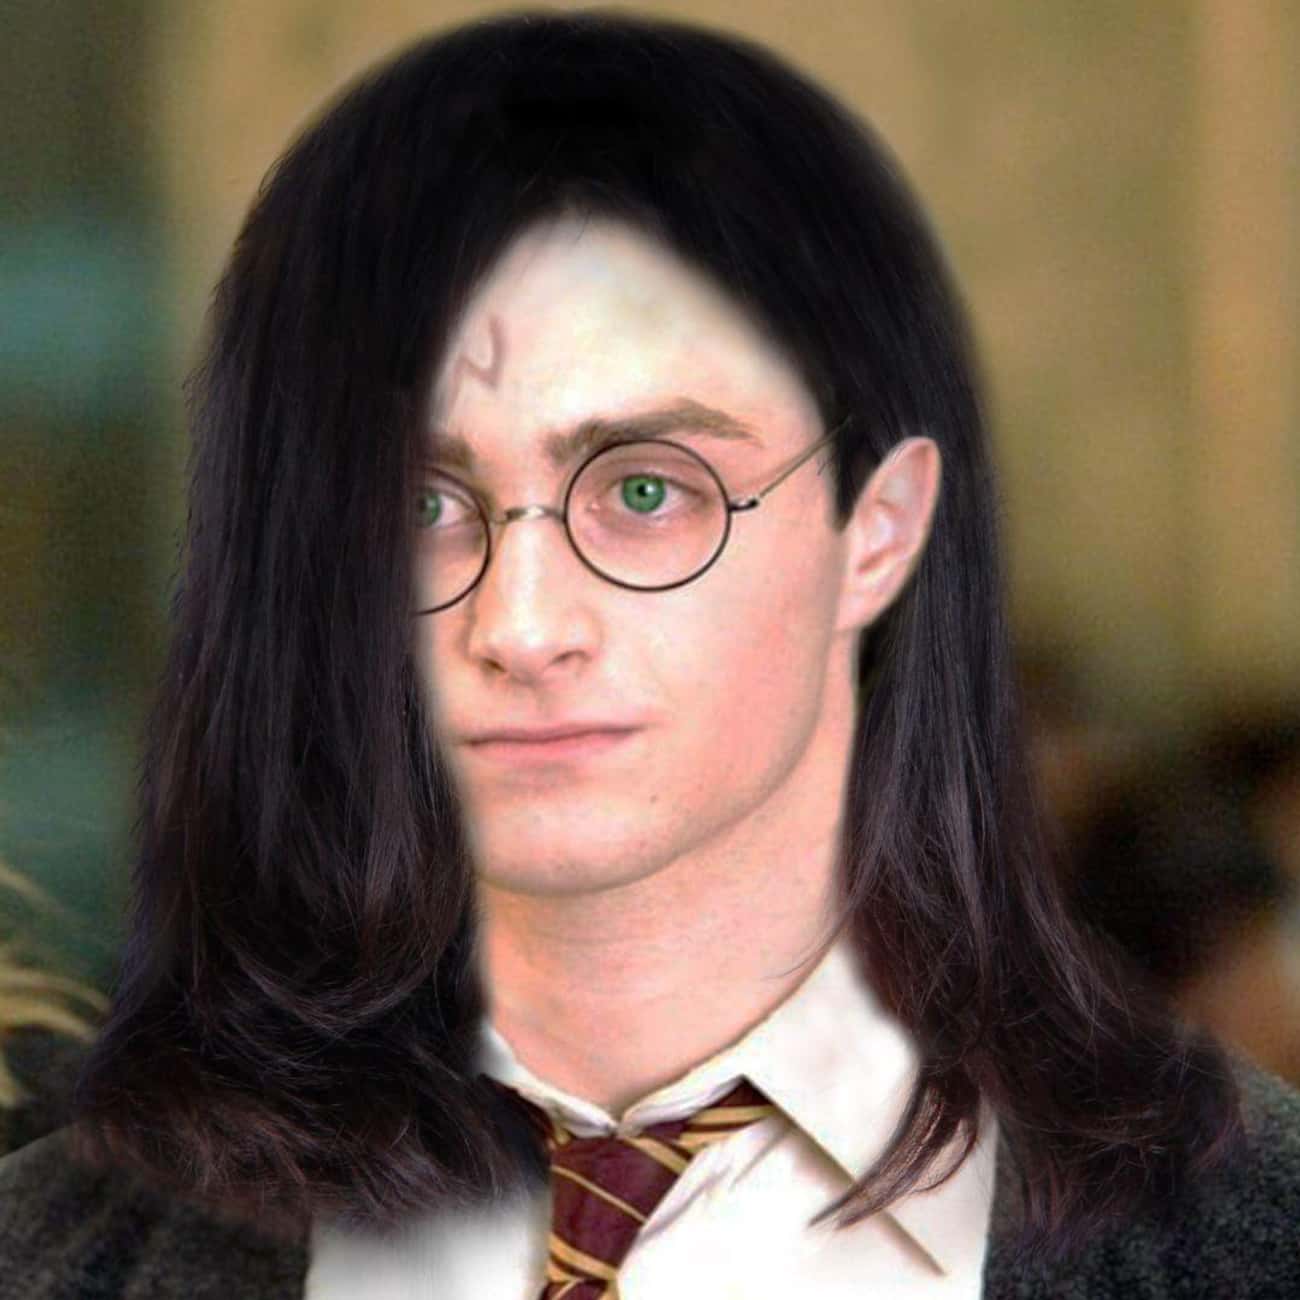 Harry Potter In The Books: Skinny, Round-Faced, And Green-Eyed